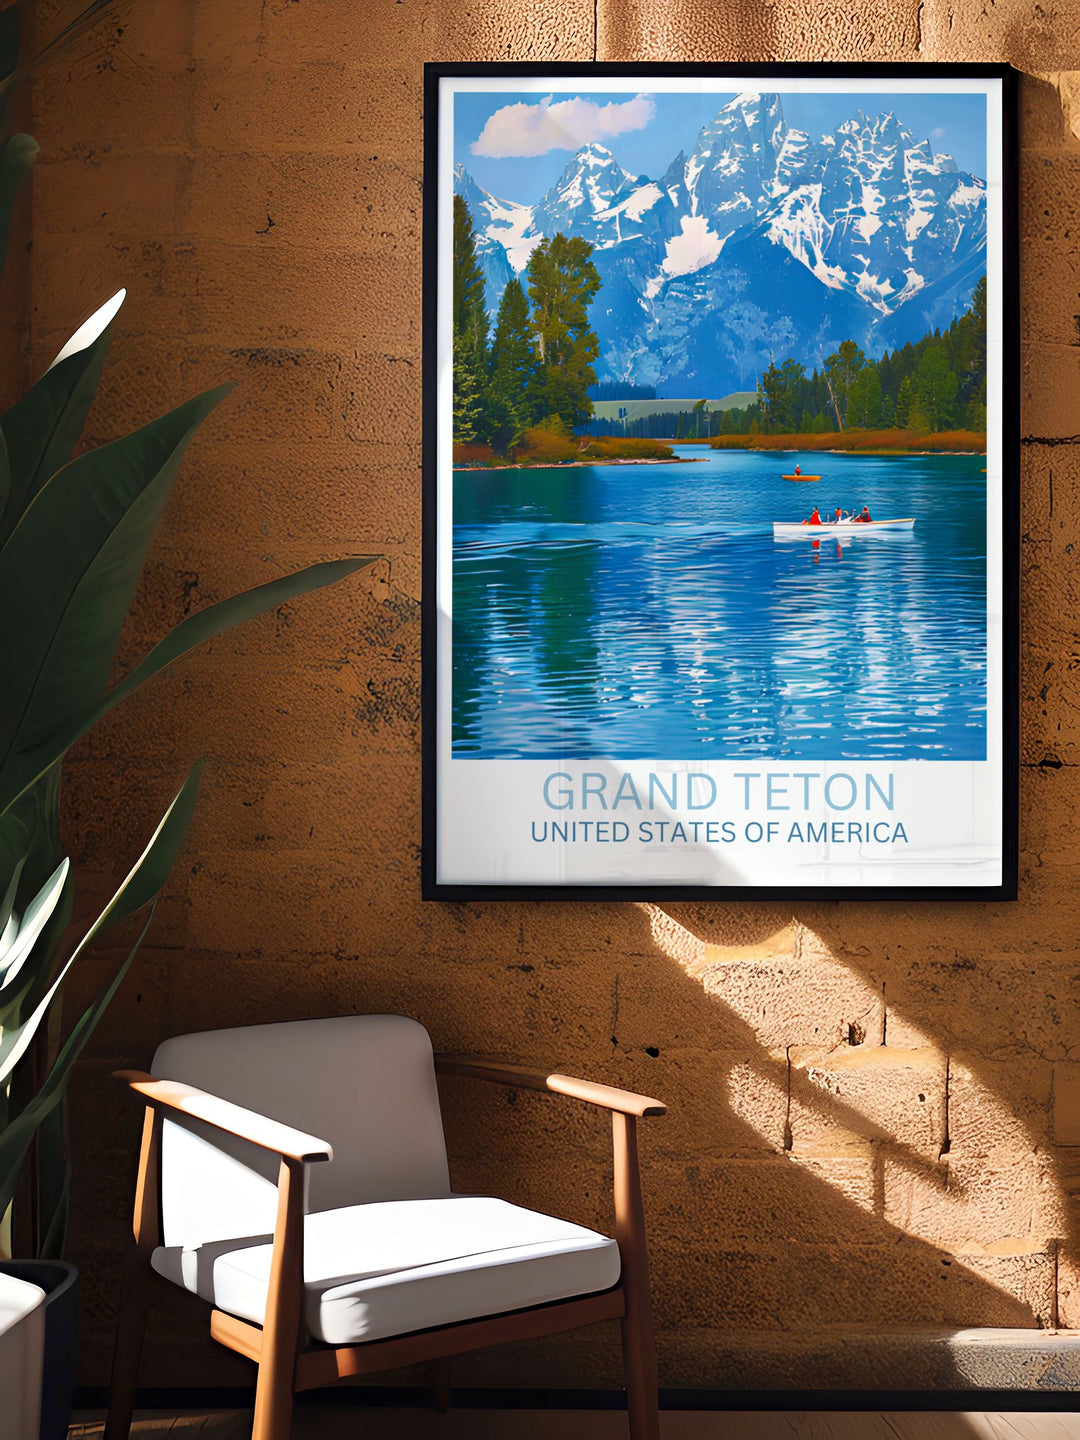 Jackson Lake surrounded by spring wildflowers, the vibrant colors enhancing the natural beauty in this canvas art.